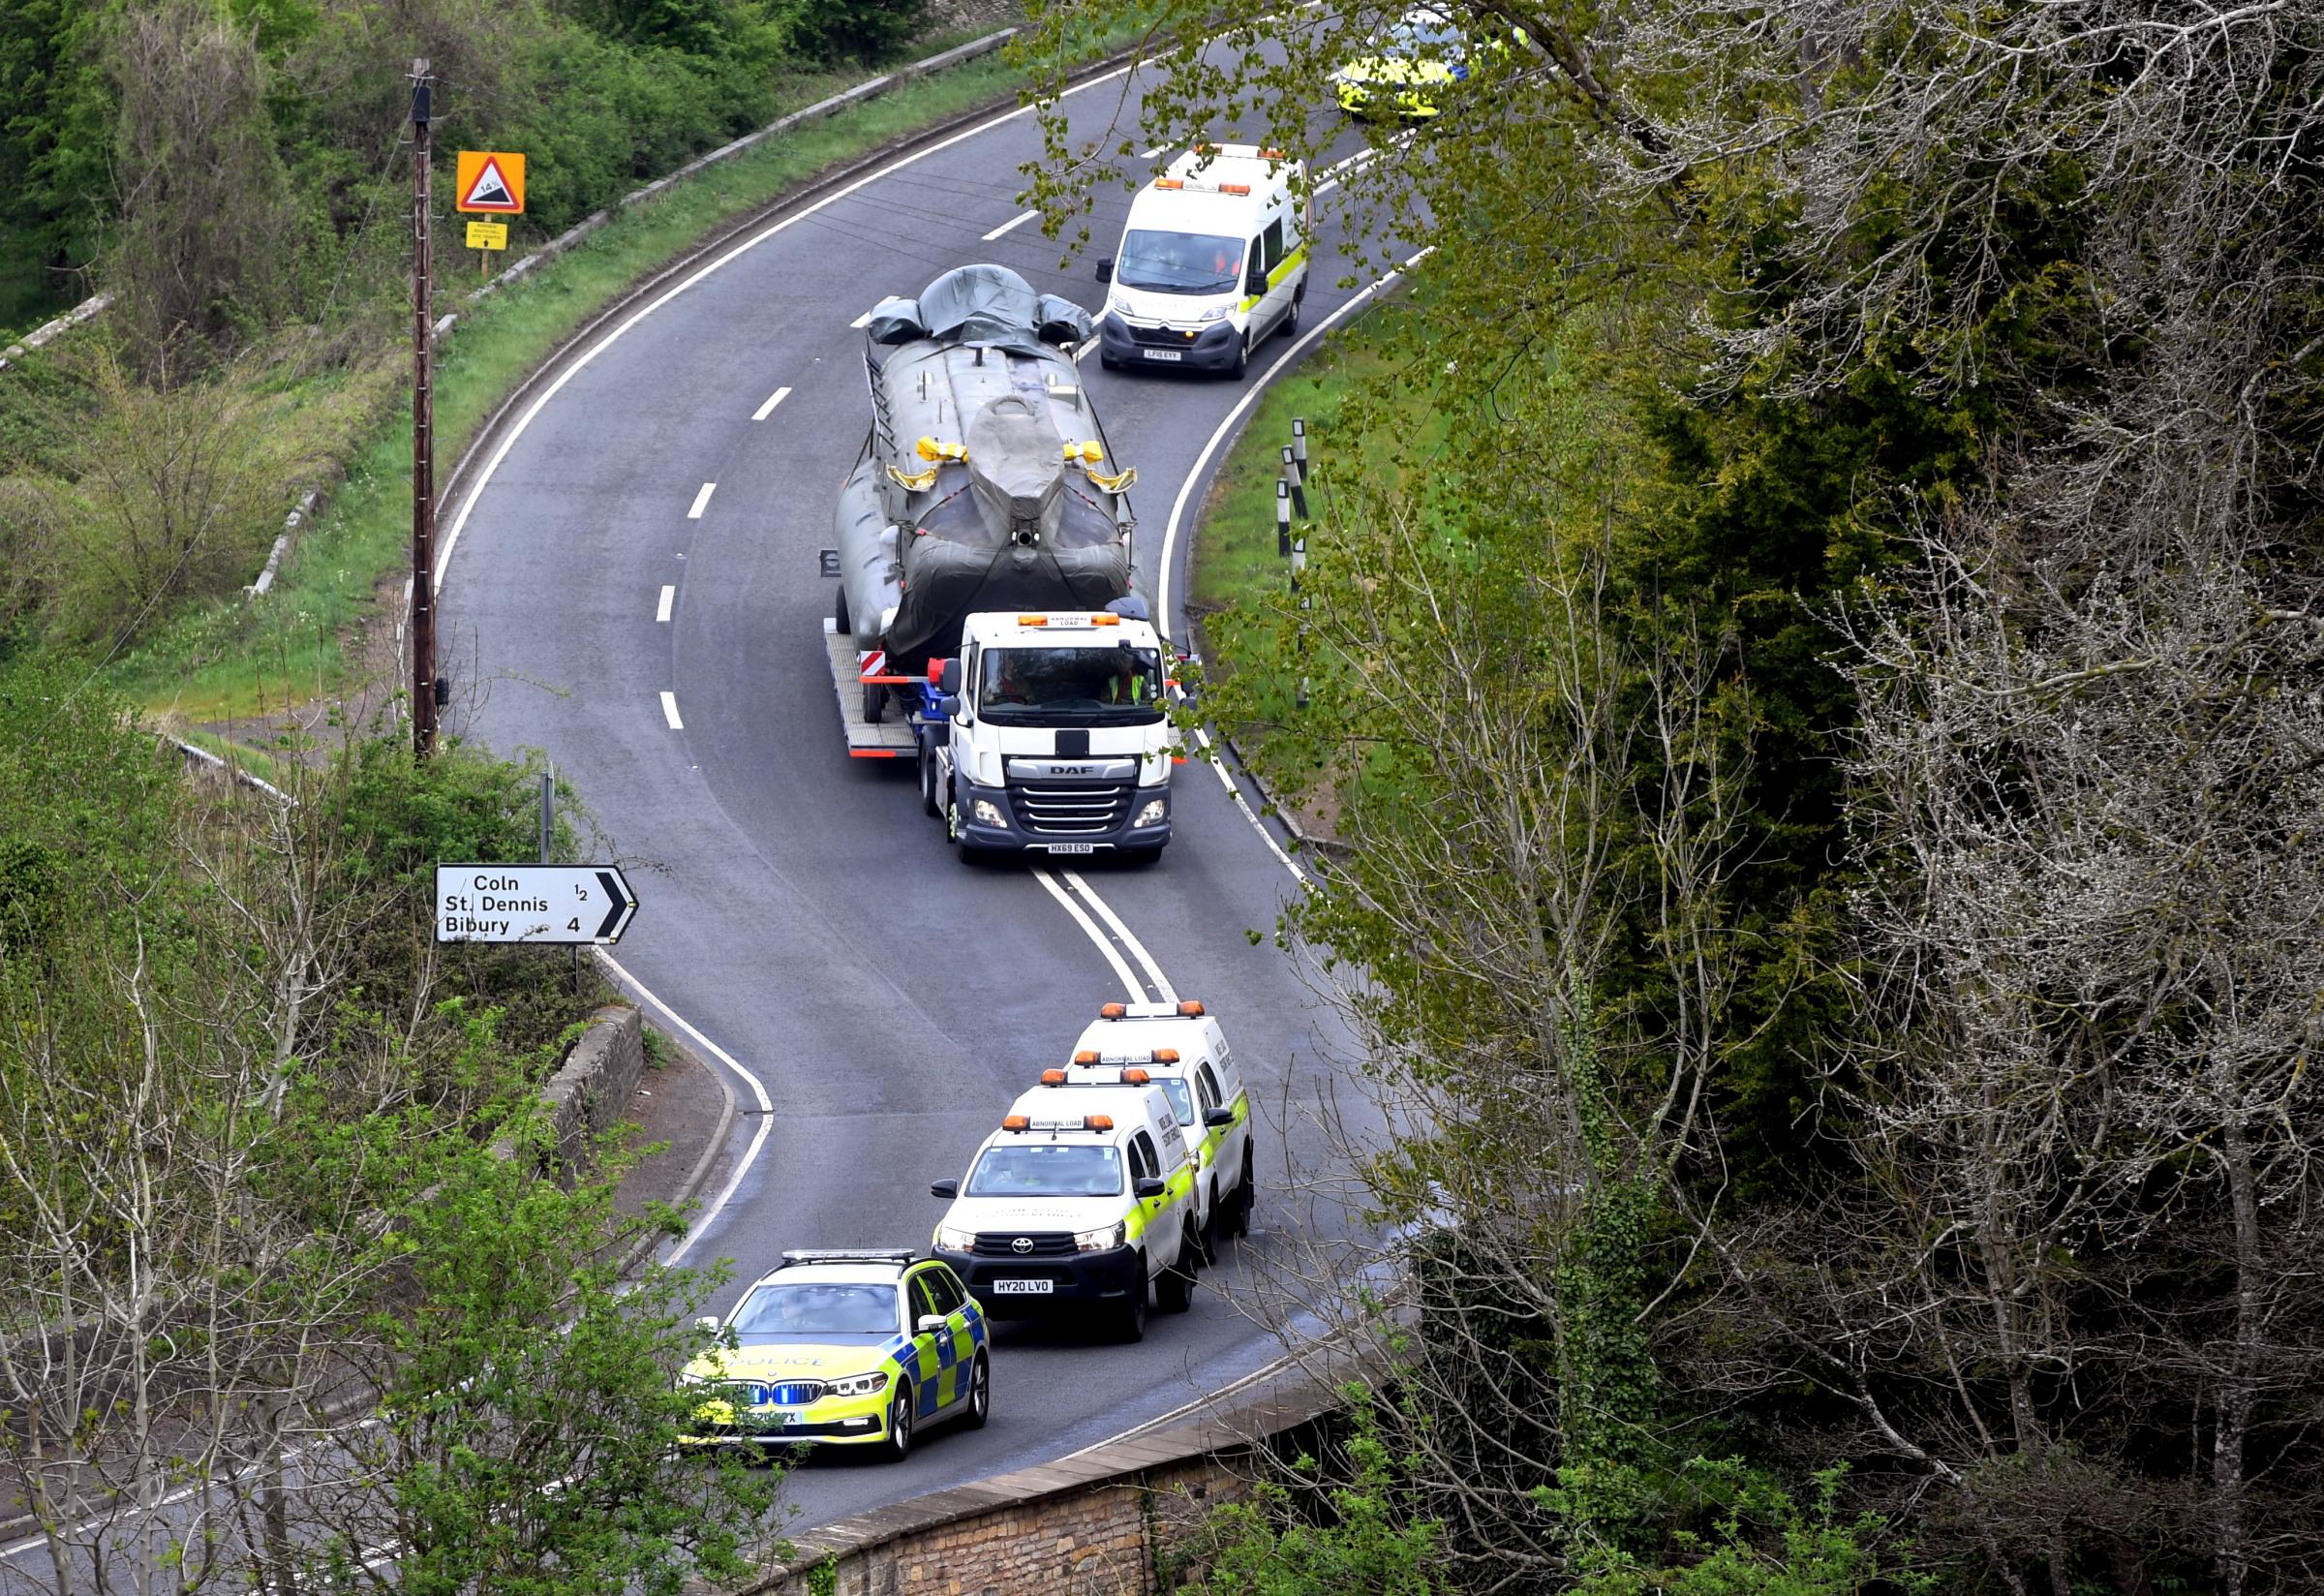 Police escort the RAF Chinook Helicopter. Photo: Paul Nicholls